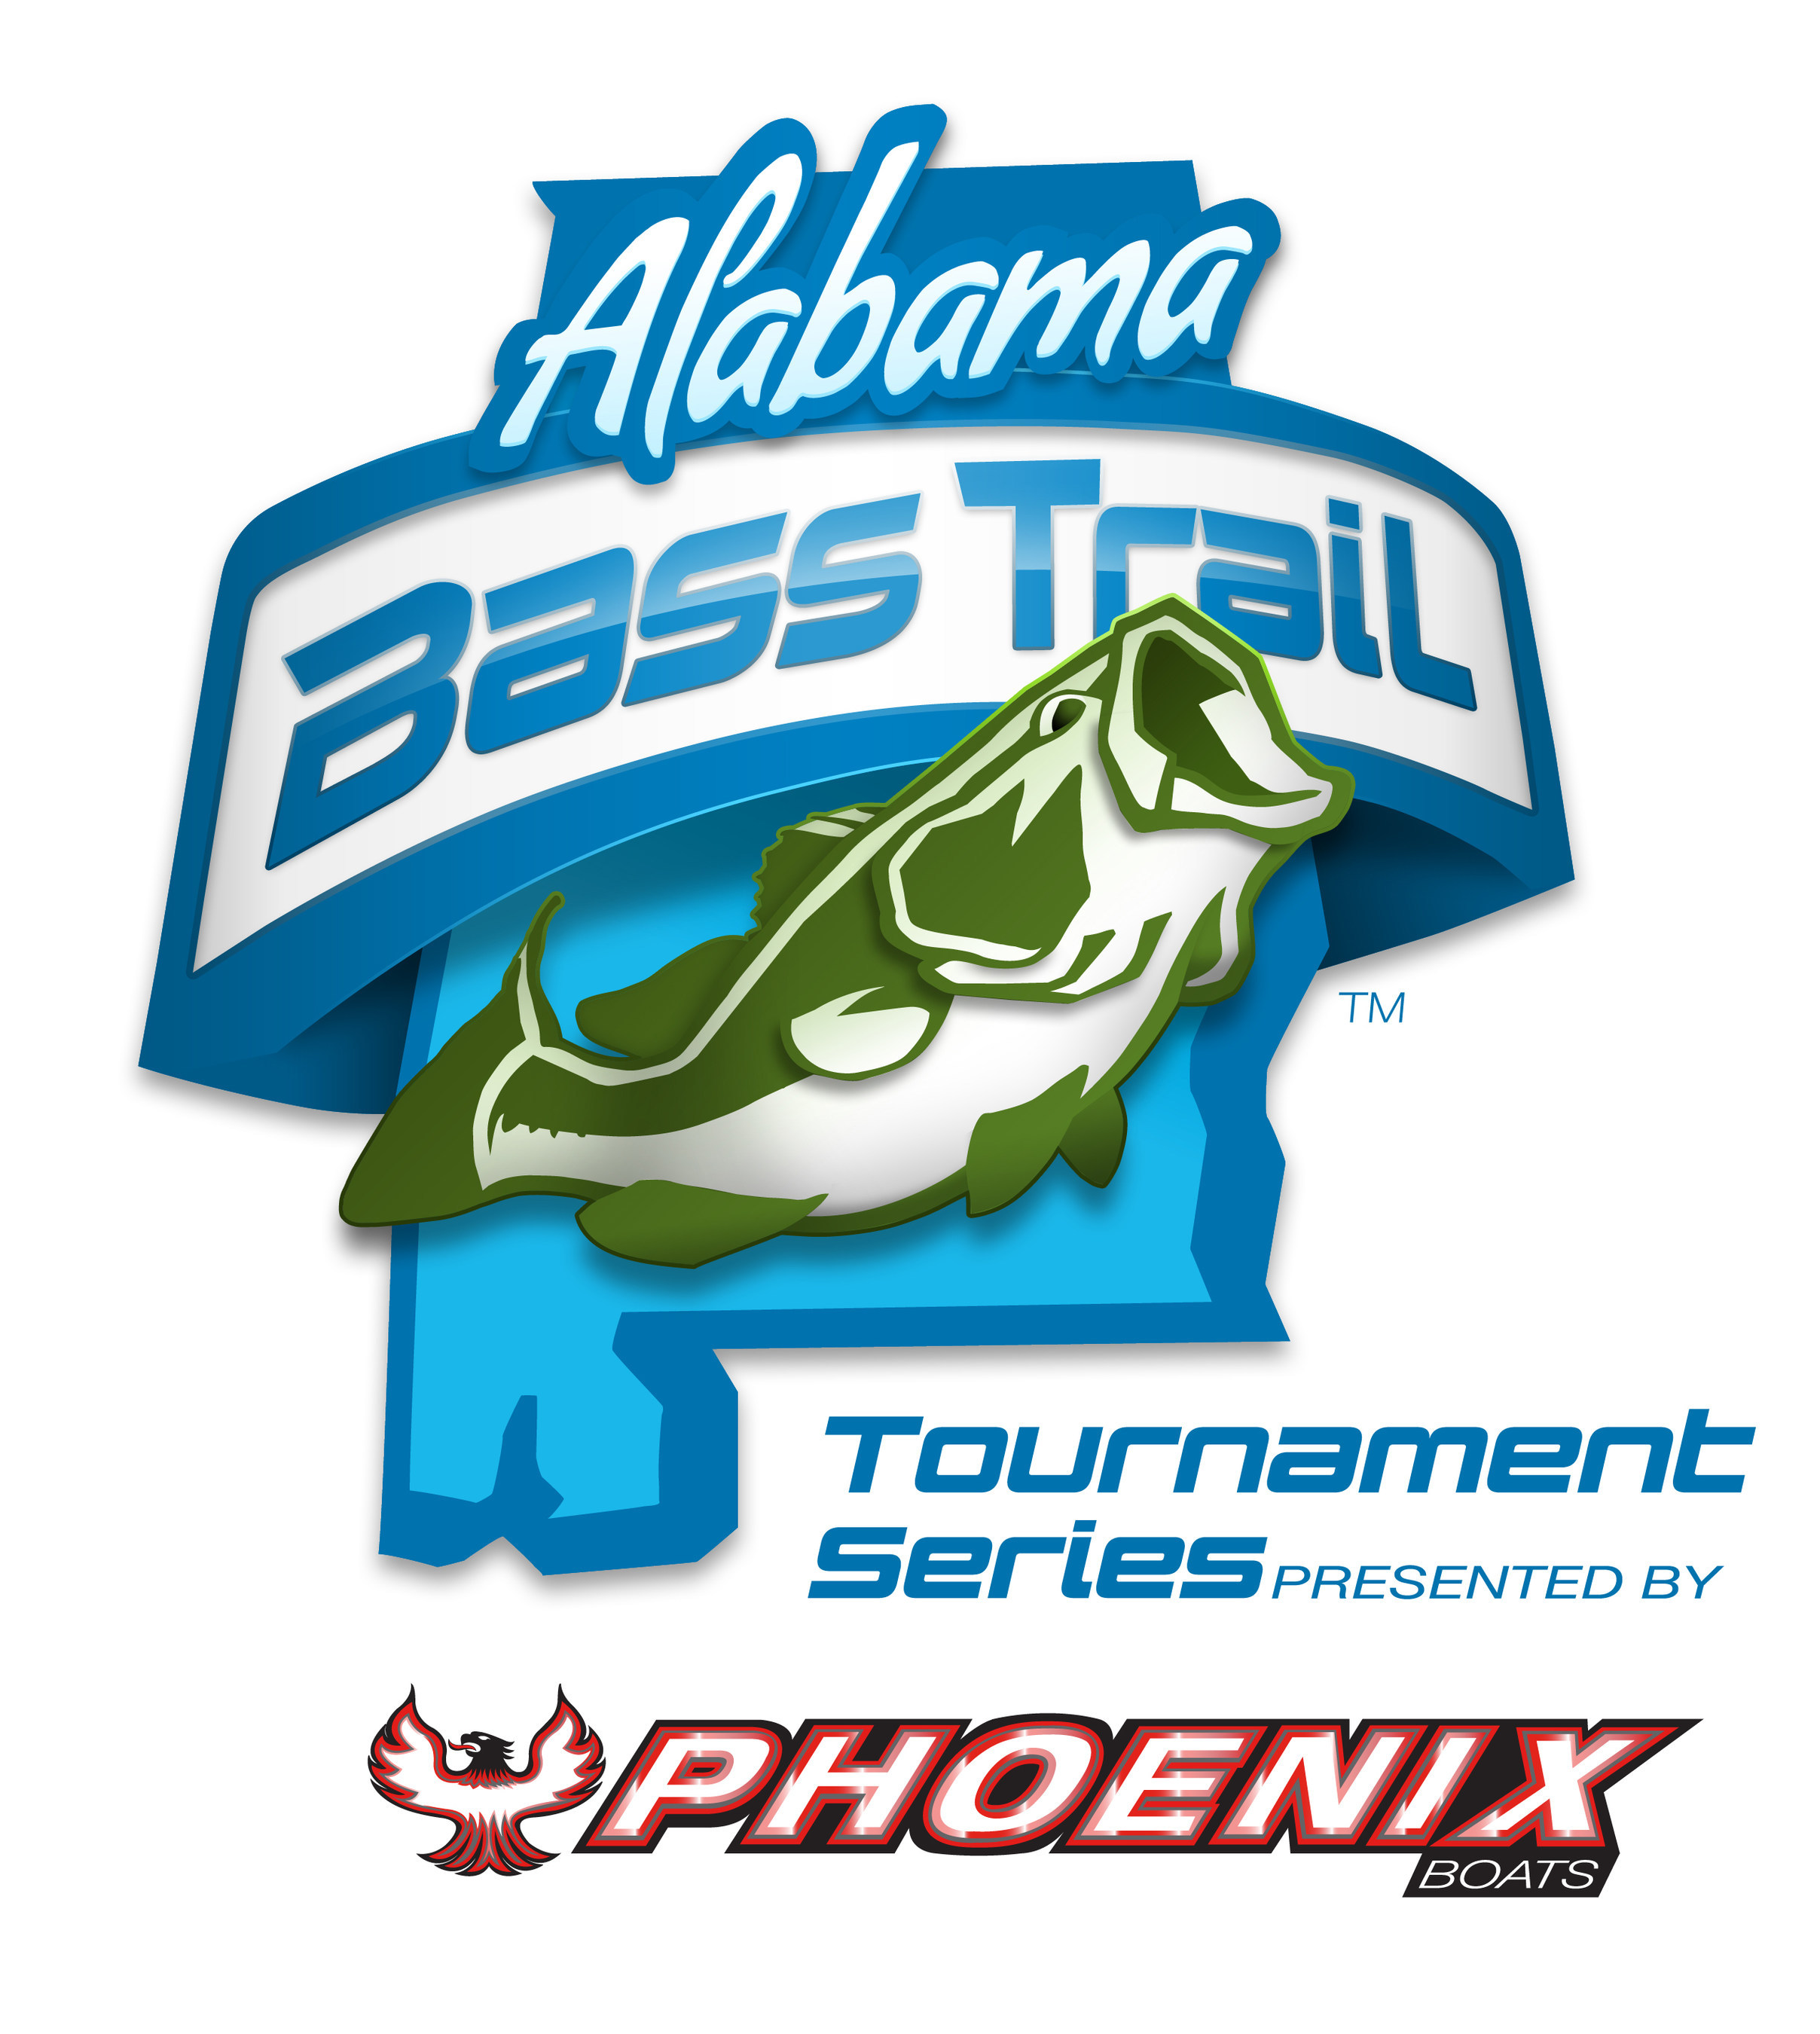 Record Sell Out for 2019 Alabama Bass Trail Tournament Series